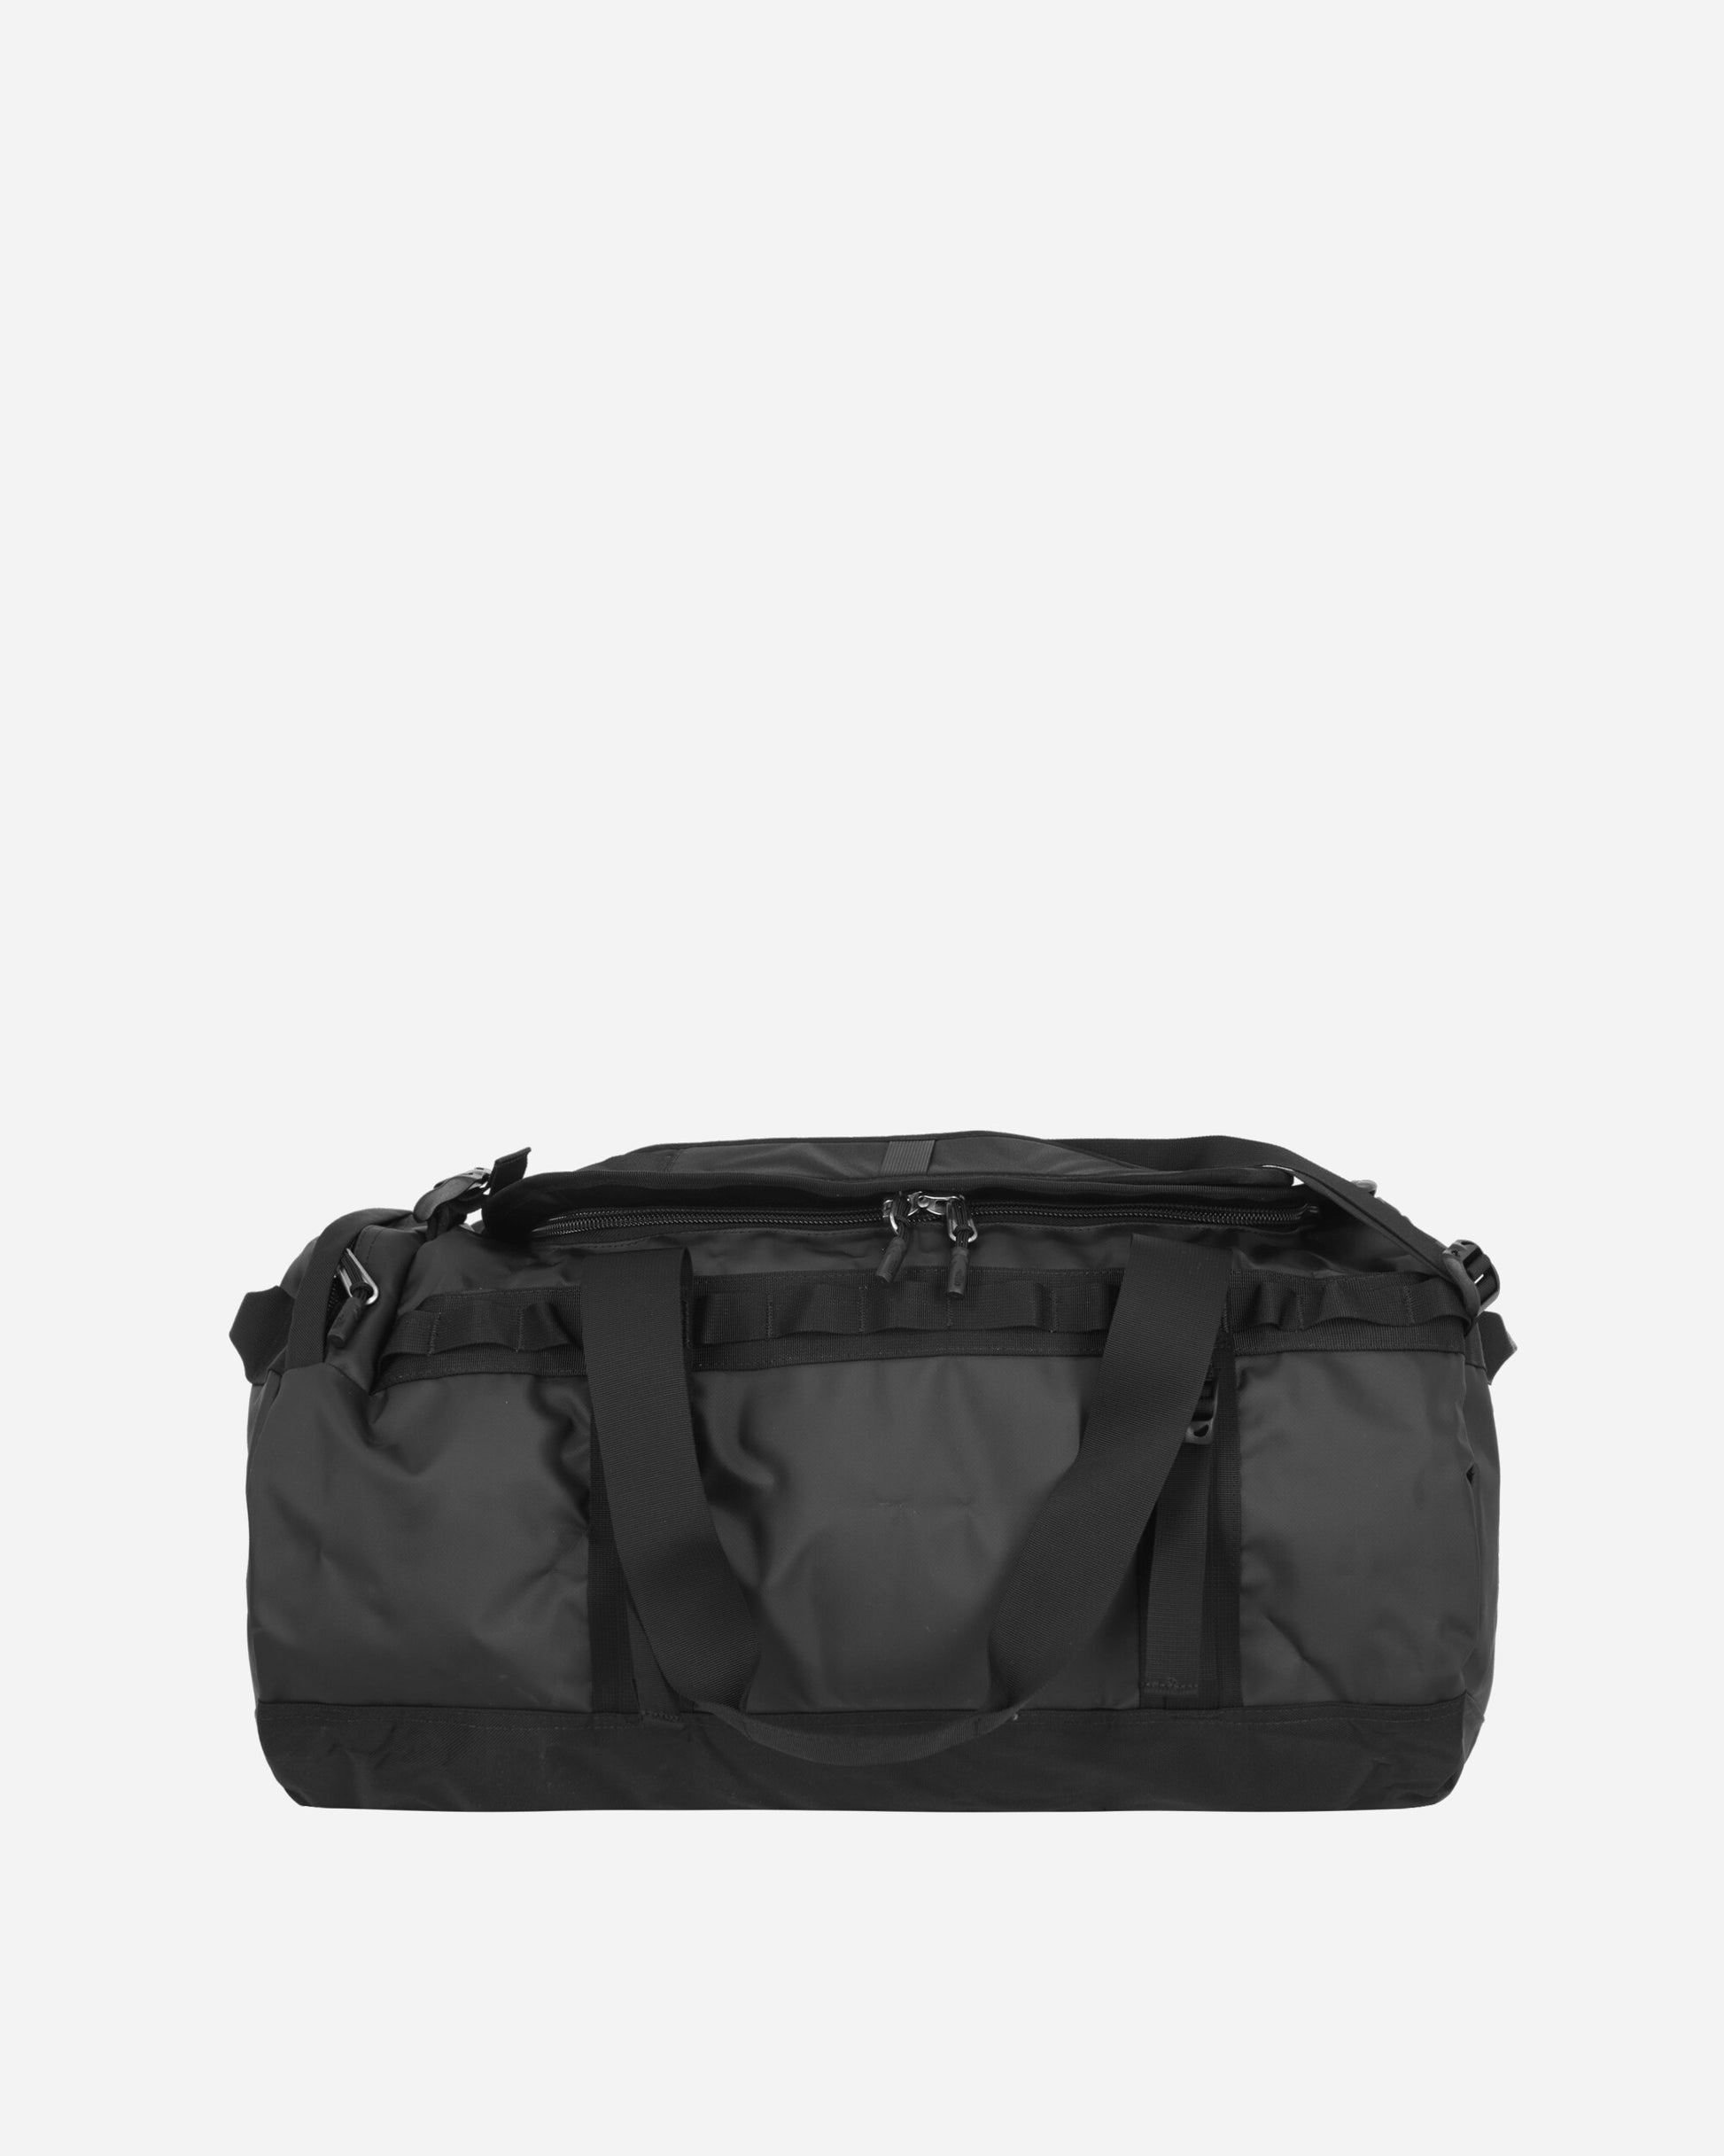 The North Face Base Camp Duffel - M Tnf Black/Tnf White Bags and Backpacks Travel Bags NF0A52SA KY41